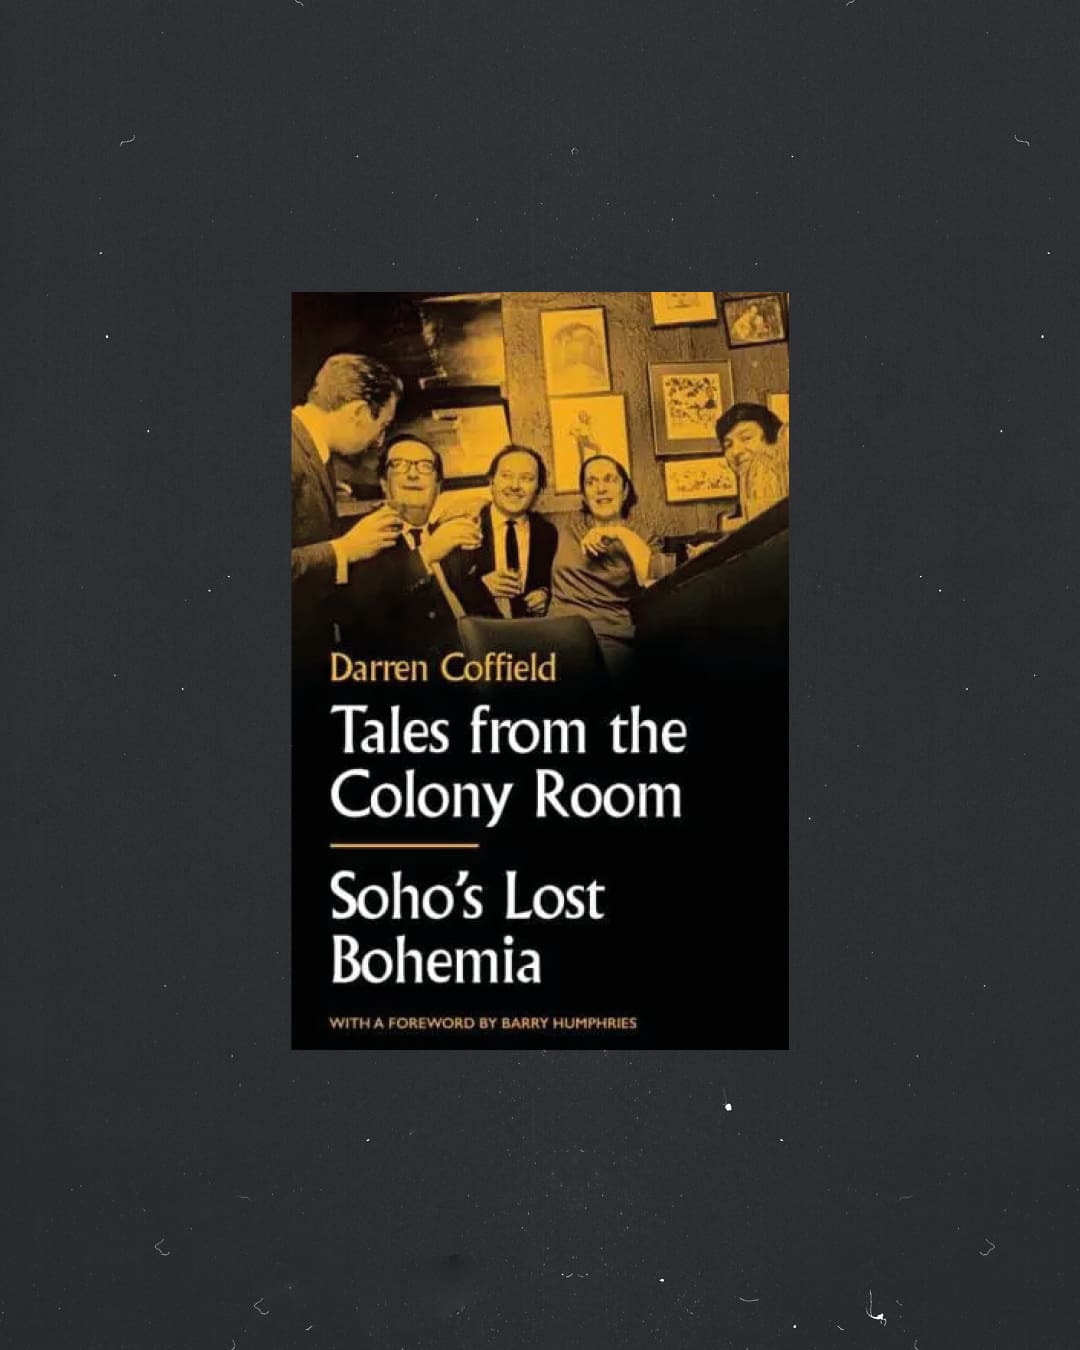 Tales from the Colony Room: Soho's Lost Bohemia by Darren Coffield book cover